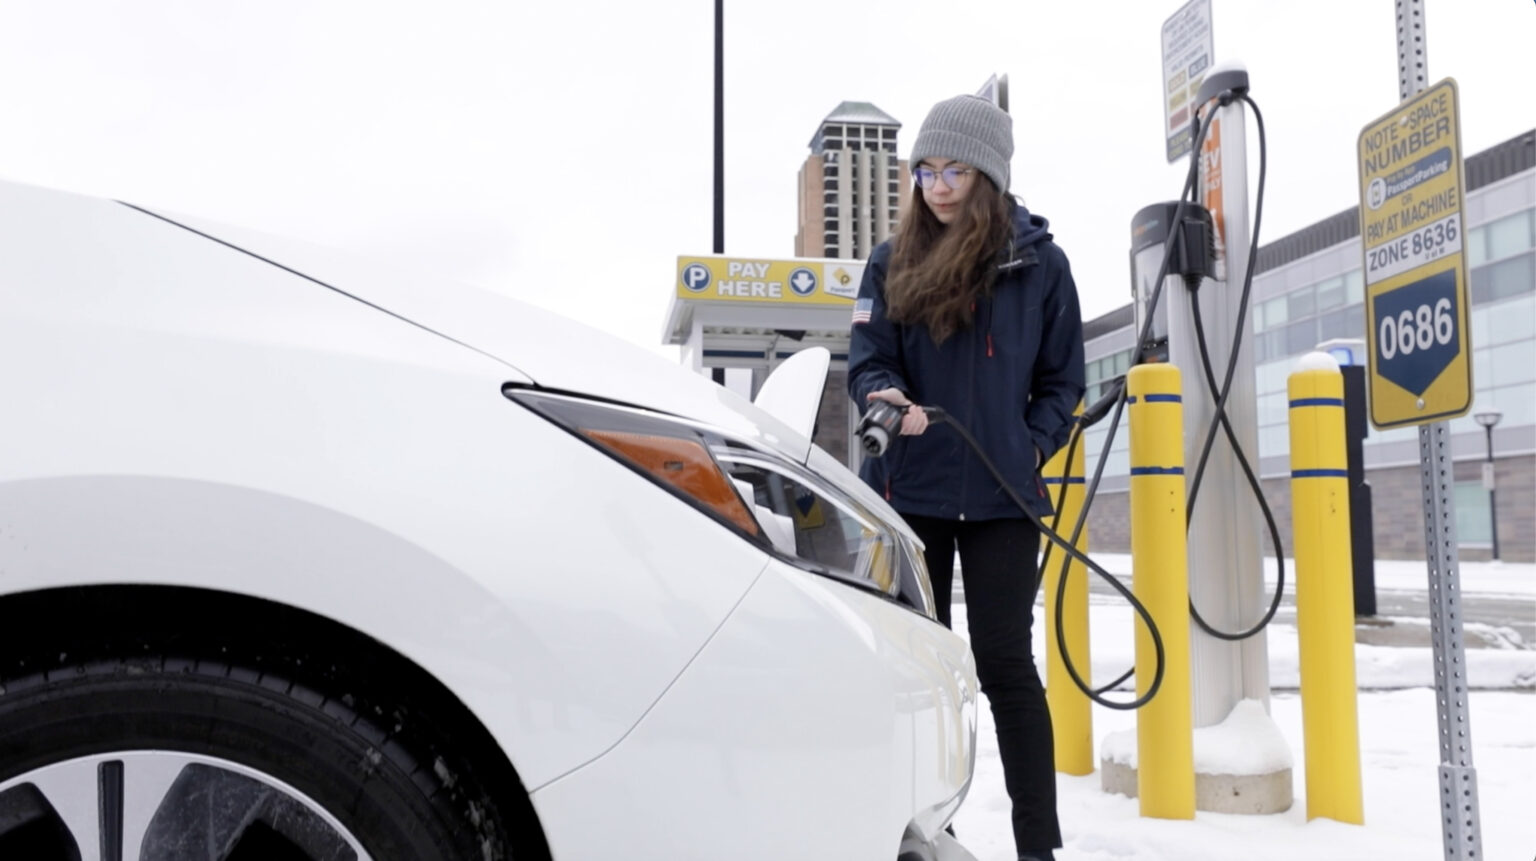 130M Electric Vehicle Center launches at UMichigan Michigan